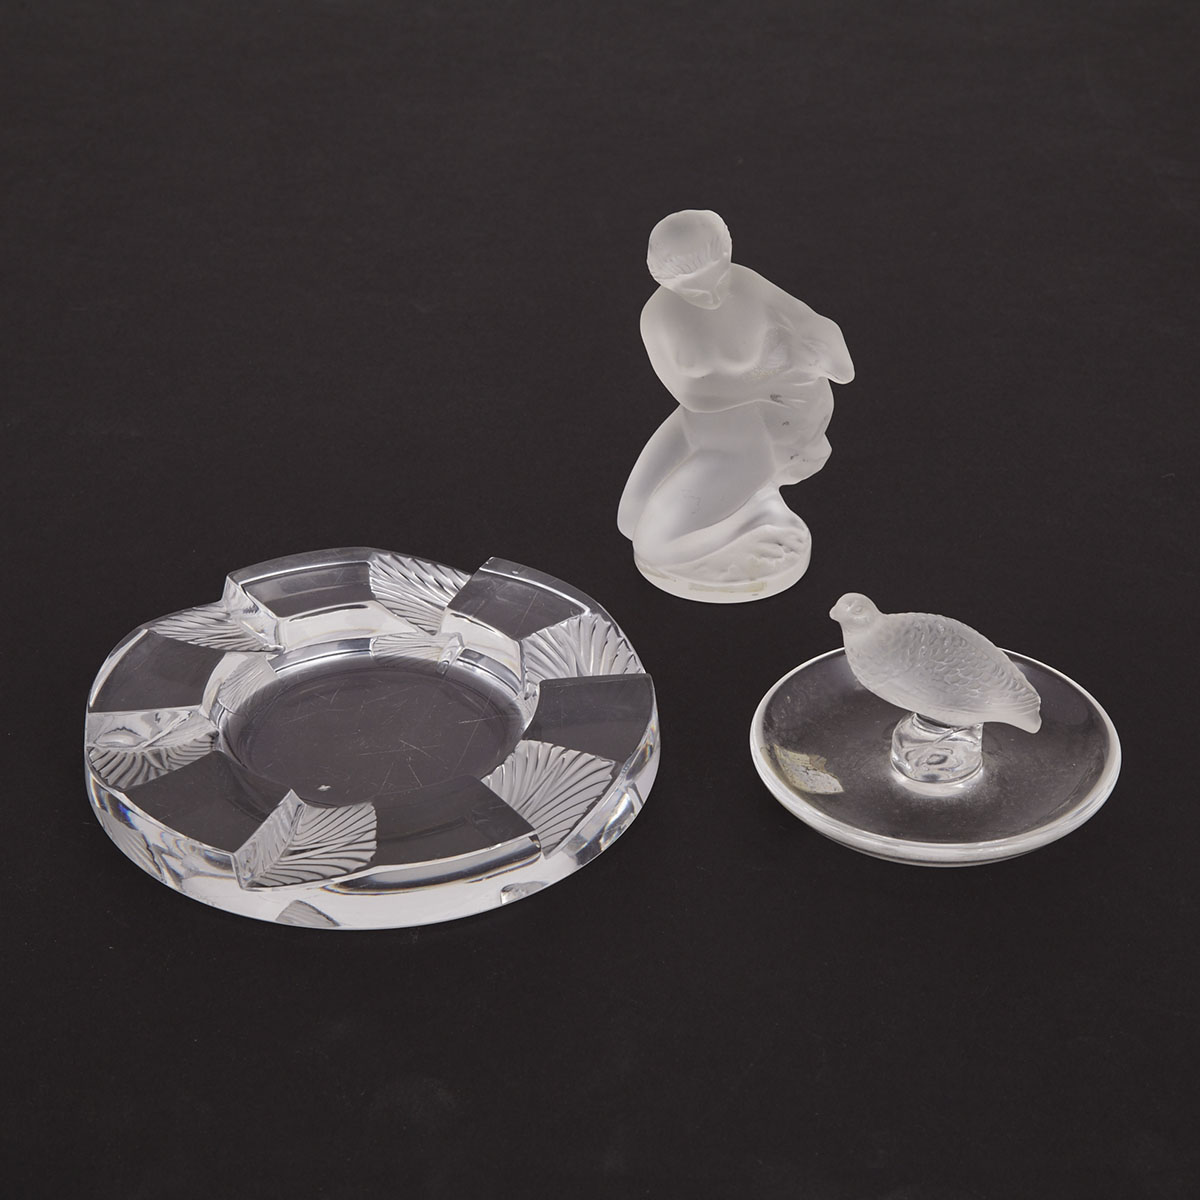 Lalique Moulded and Frosted Glass Statuette, Ring Tray and an Ashtray, post-1945